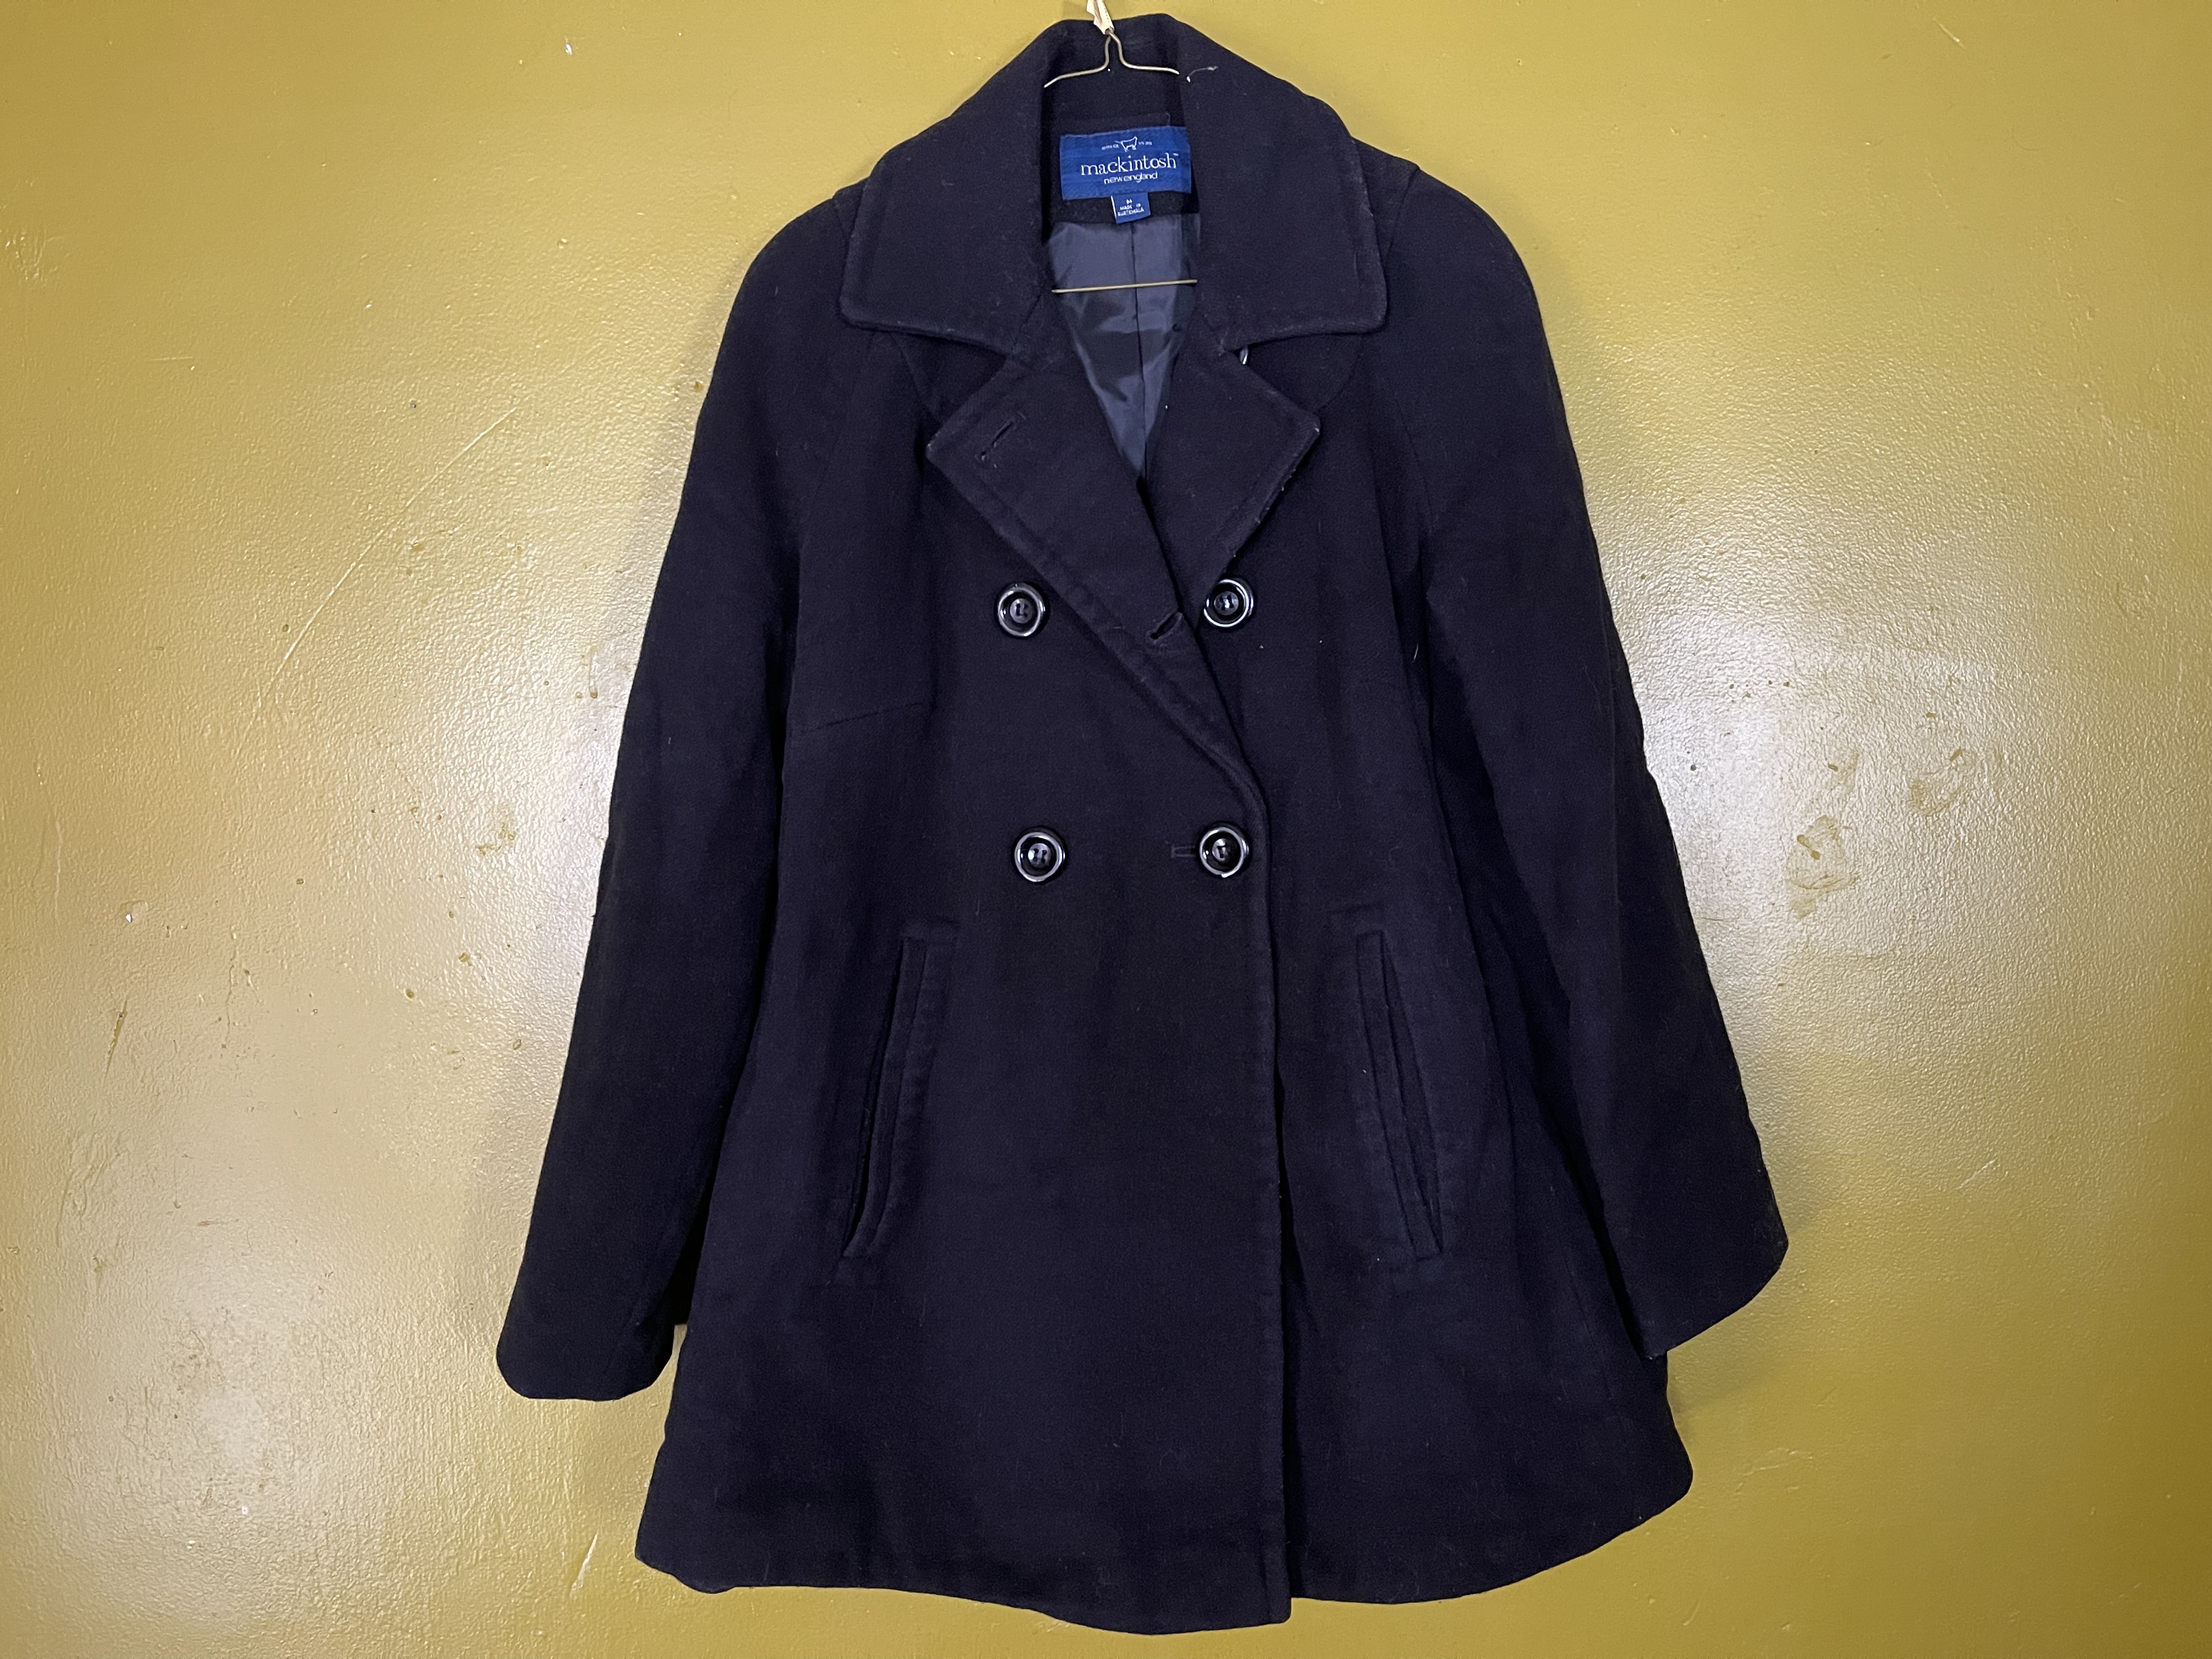 a peacoat after lint removal.